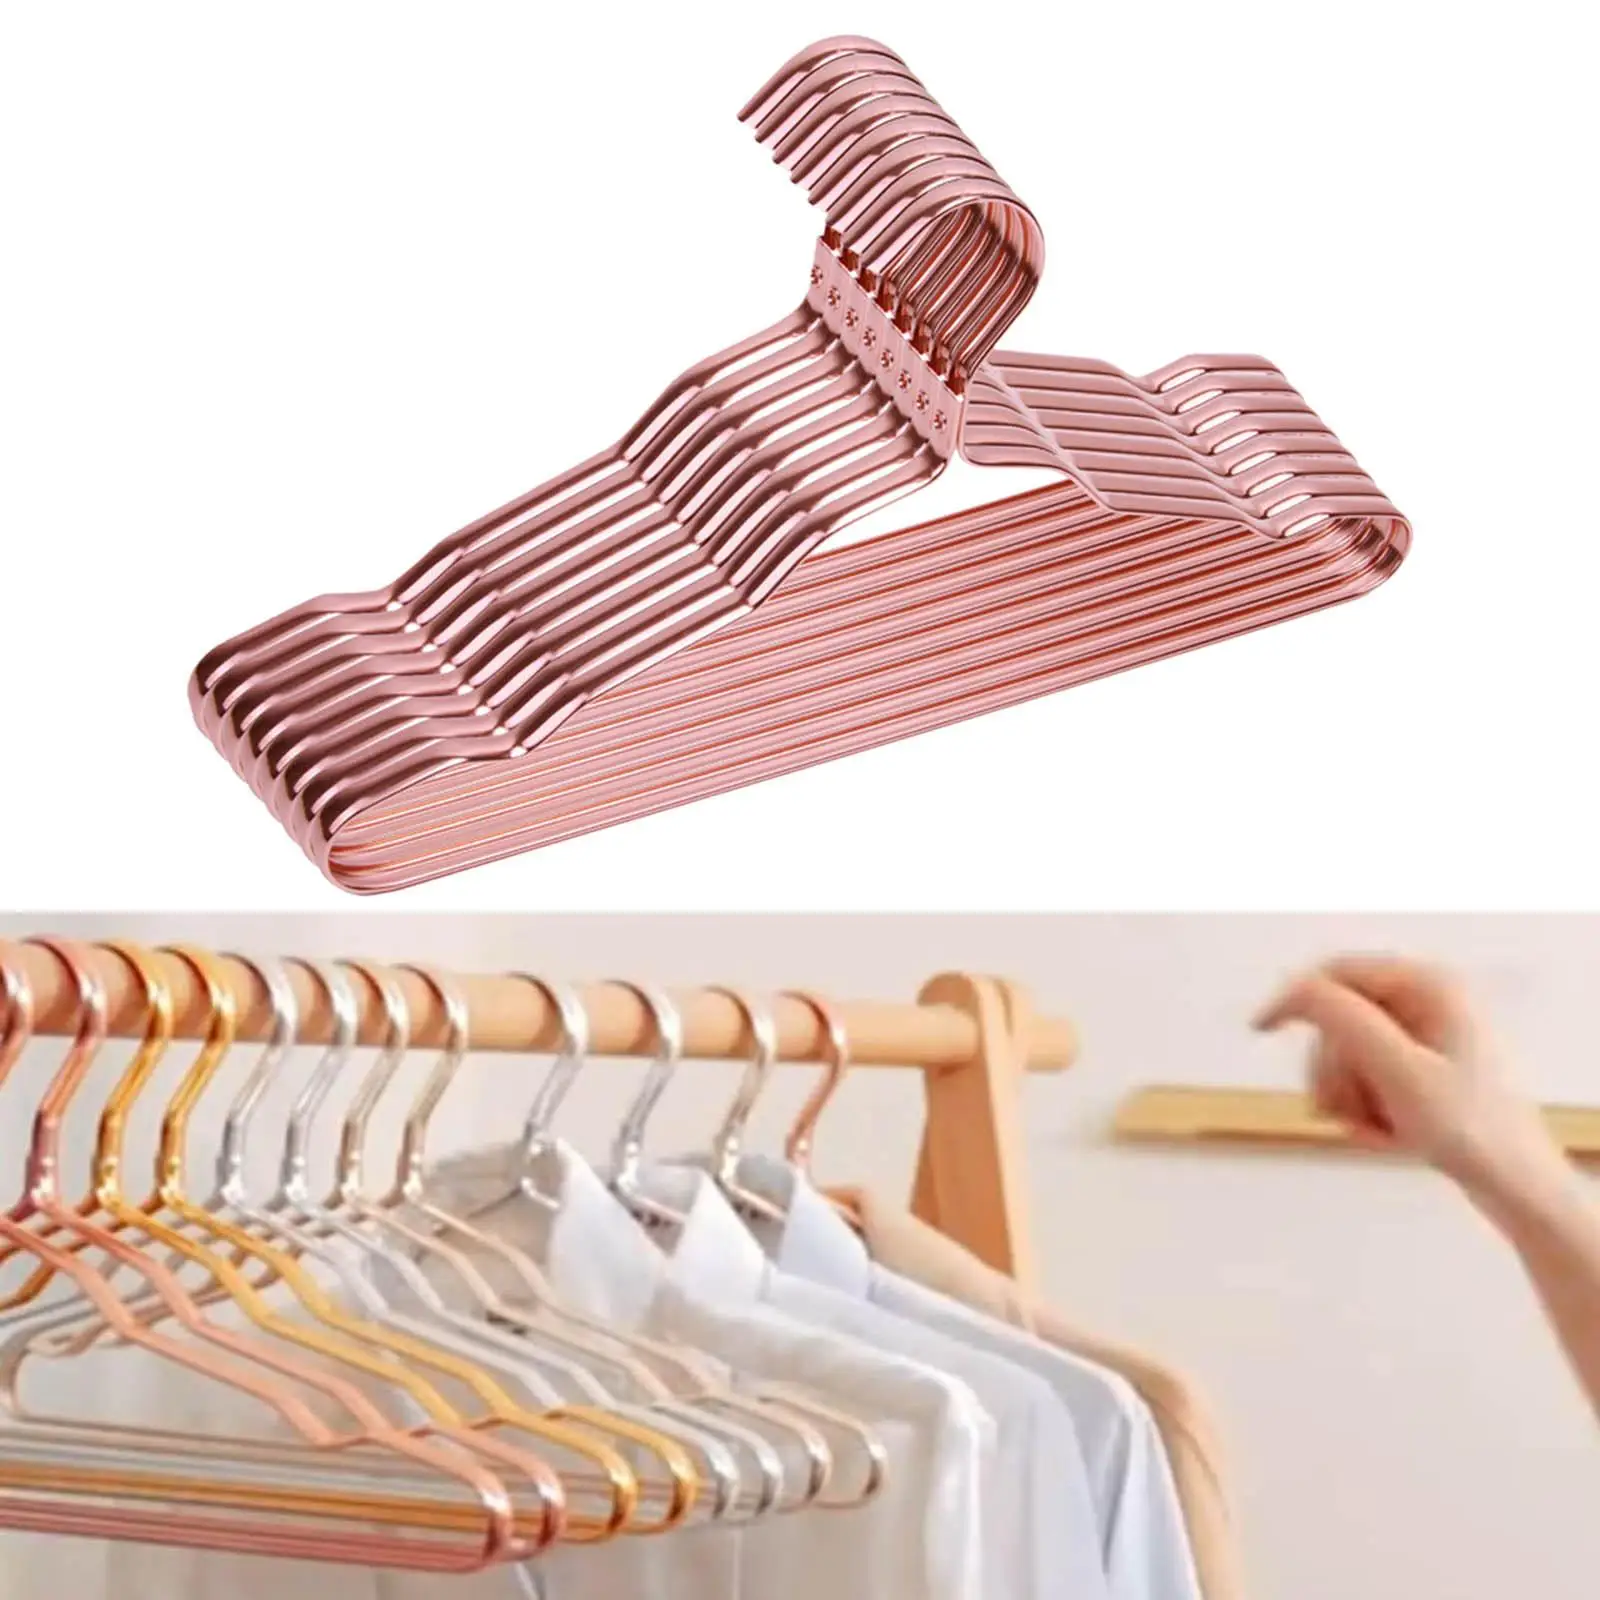 10Pcs Strong Metal Wire Hangers Anti Slip Drying Rack Seamless for Laundry